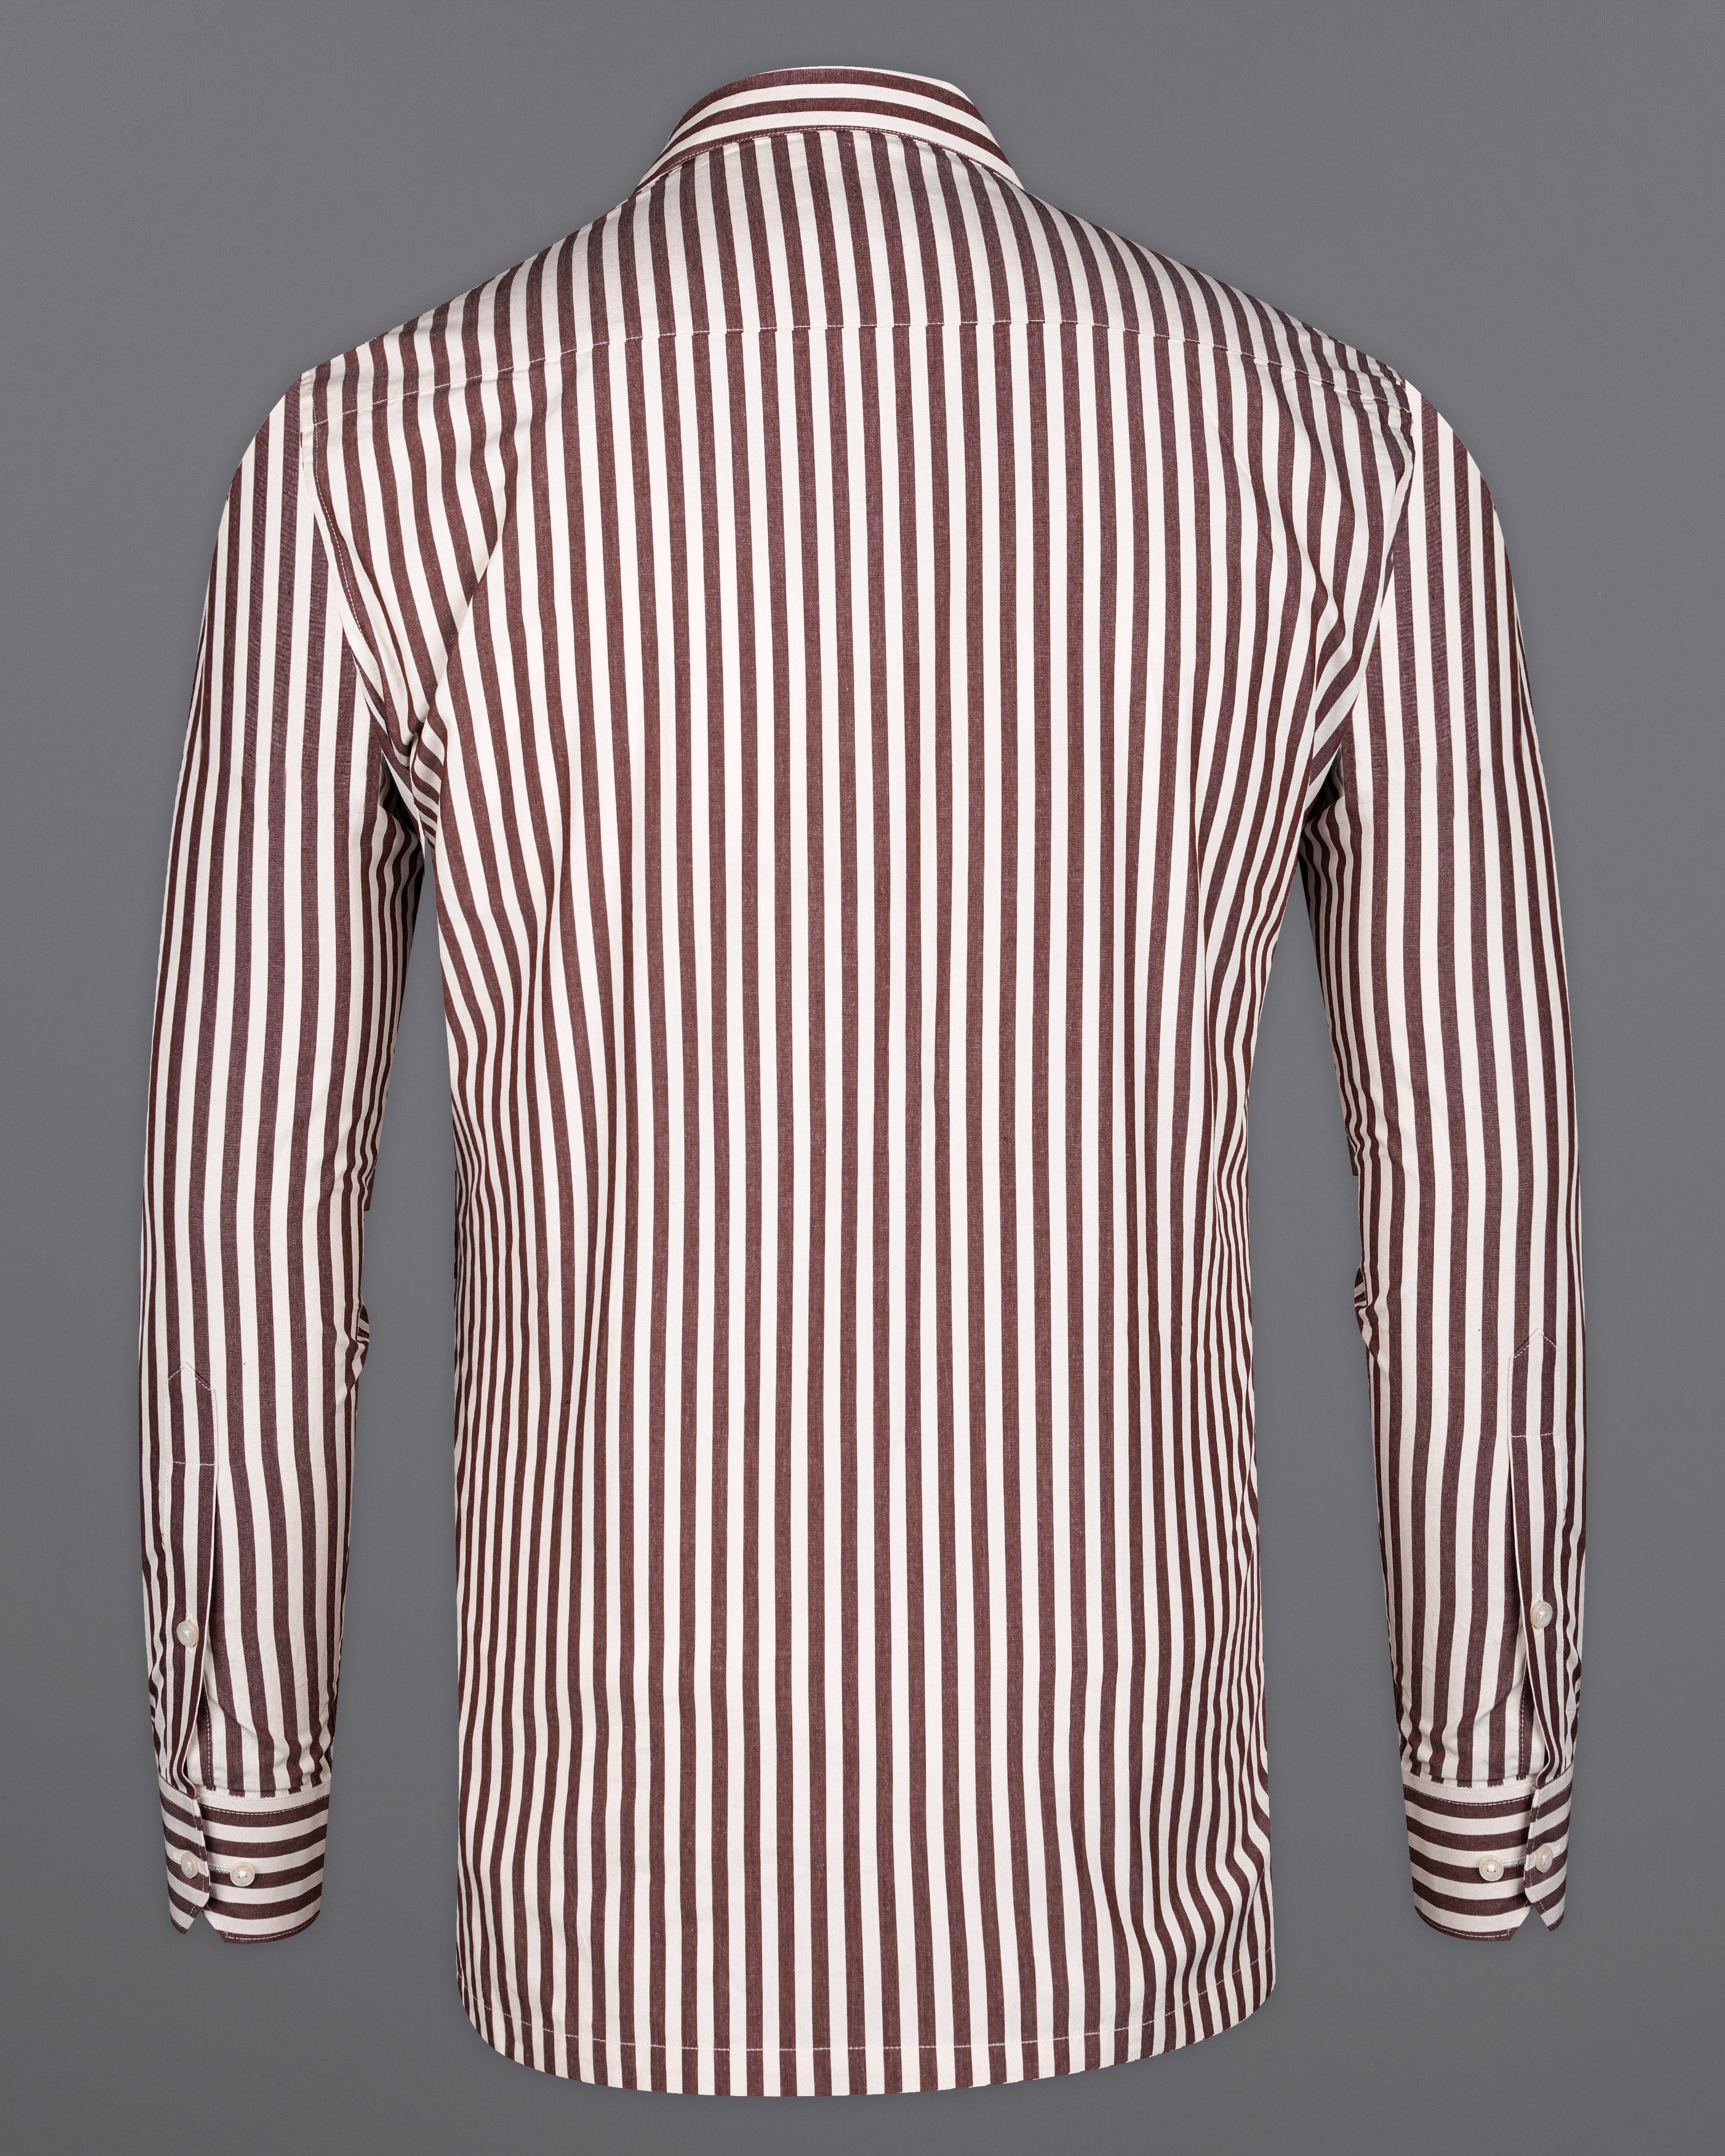 Millbrook Brown and White Striped Premium Cotton Designer Shirt 9854-CC-38, 9854-CC-H-38, 9854-CC-39, 9854-CC-H-39, 9854-CC-40, 9854-CC-H-40, 9854-CC-42, 9854-CC-H-42, 9854-CC-44, 9854-CC-H-44, 9854-CC-46, 9854-CC-H-46, 9854-CC-48, 9854-CC-H-48, 9854-CC-50, 9854-CC-H-50, 9854-CC-52, 9854-CC-H-52